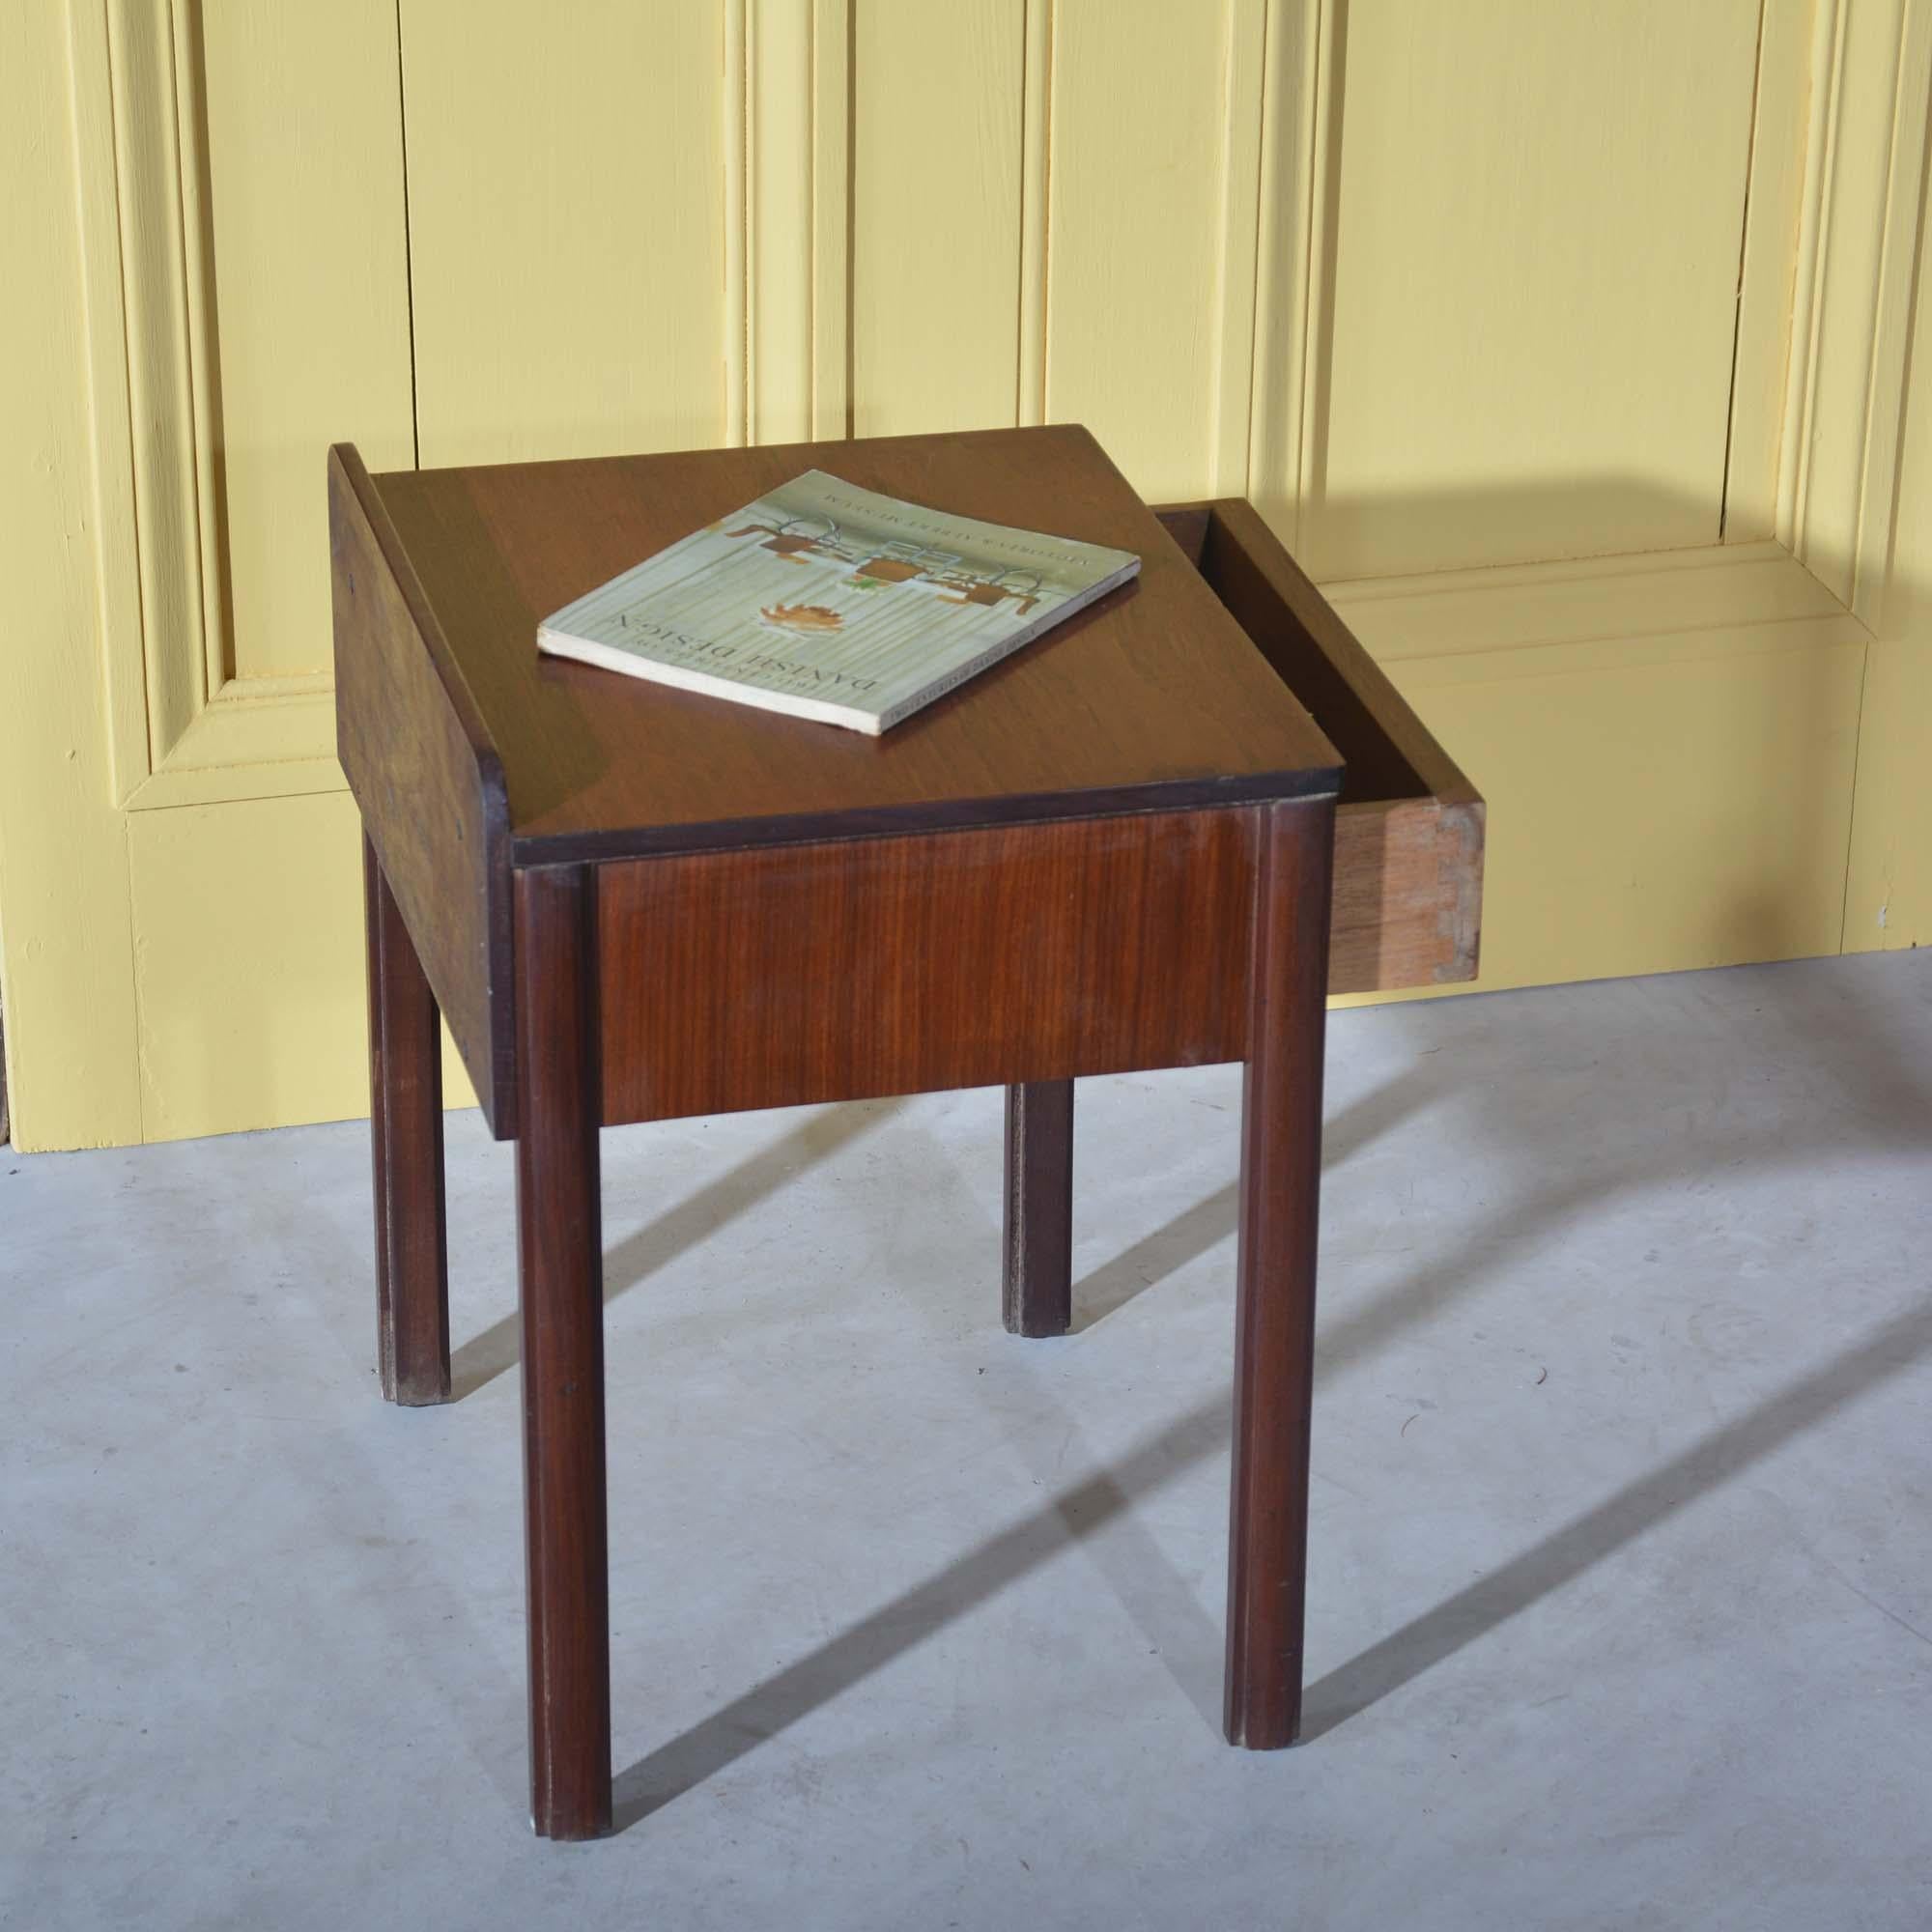 Teak Mid-century Danish design teak bedside table, retailed by Heals and Co For Sale